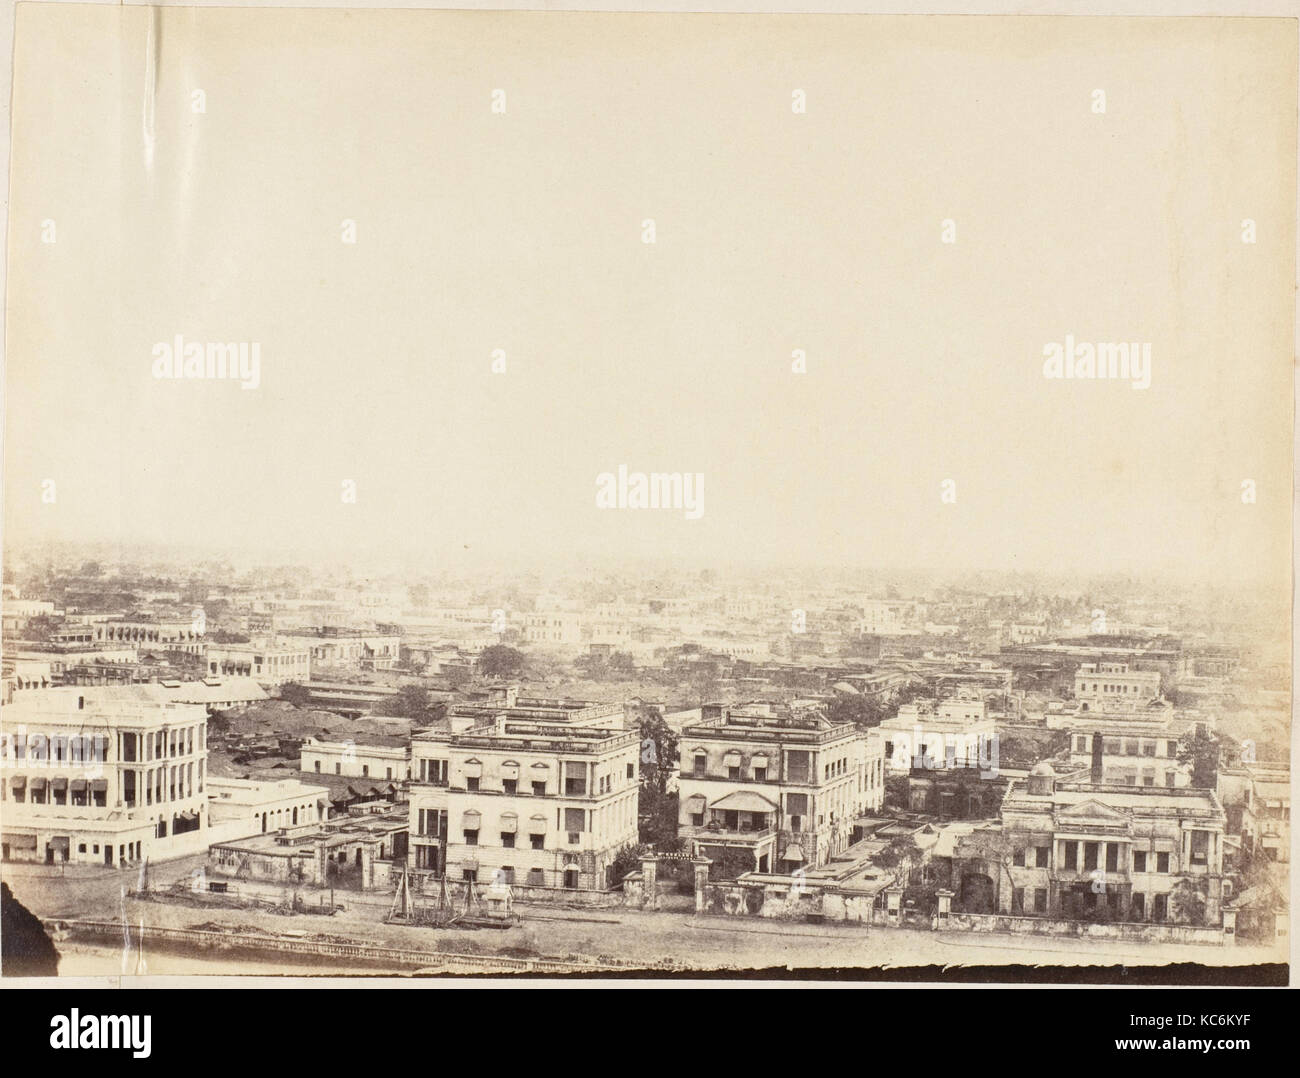 View of the City from the Ochterlony Monument, Calcutta, Captain R. B. Hill, 1850s Stock Photo